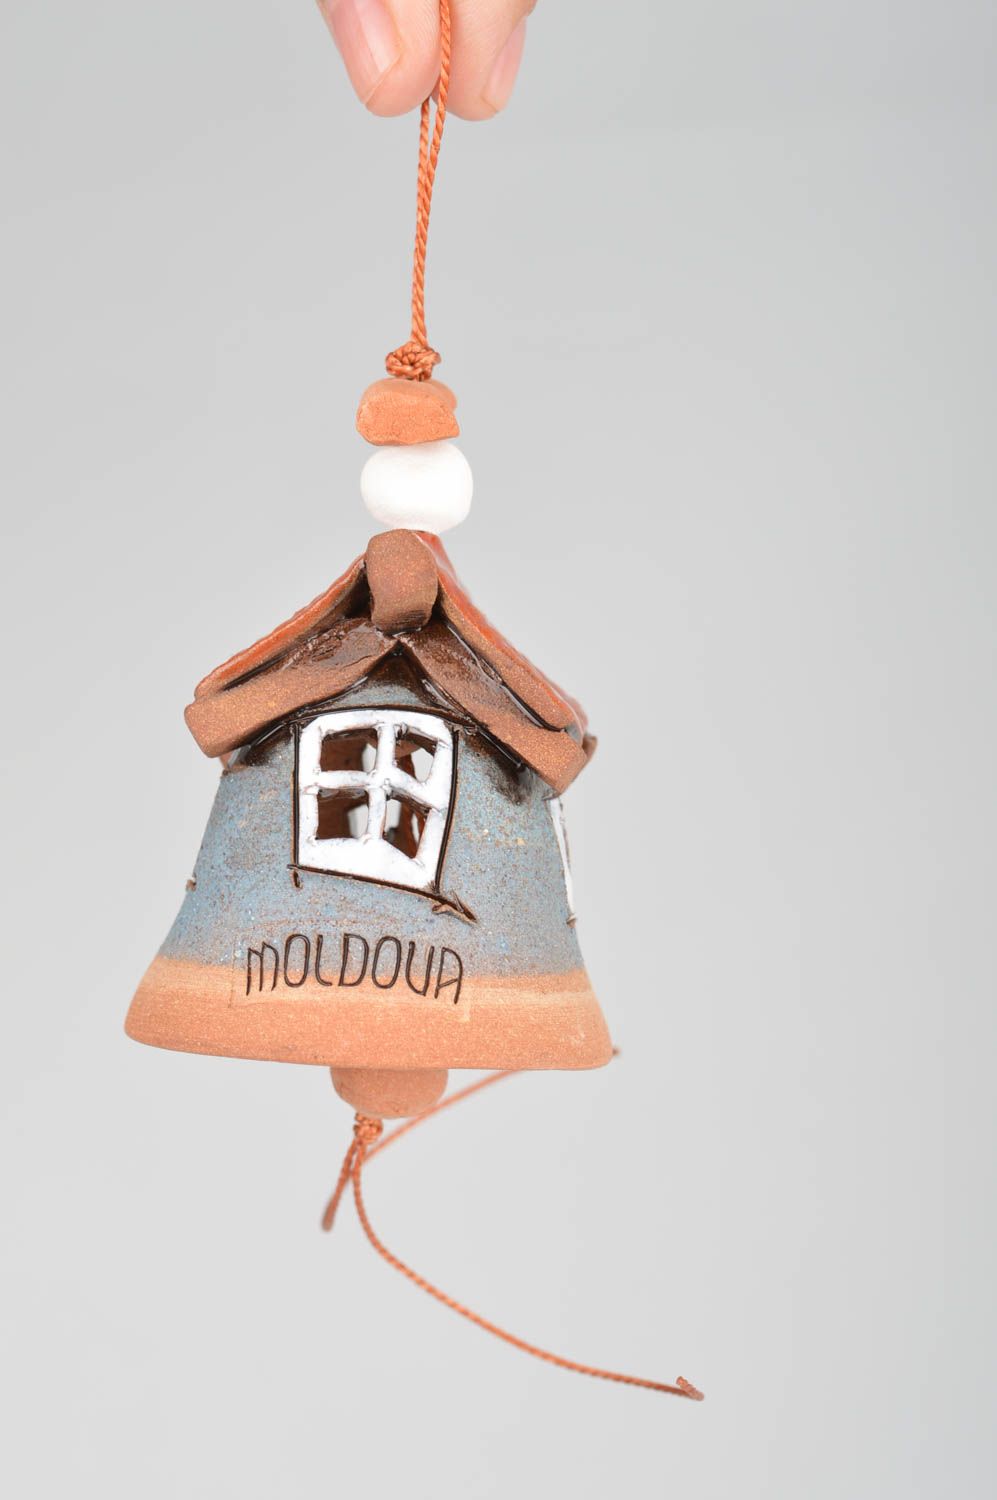 Homemade designer ceramic wall hanging bell in the shape of house with red roof photo 3